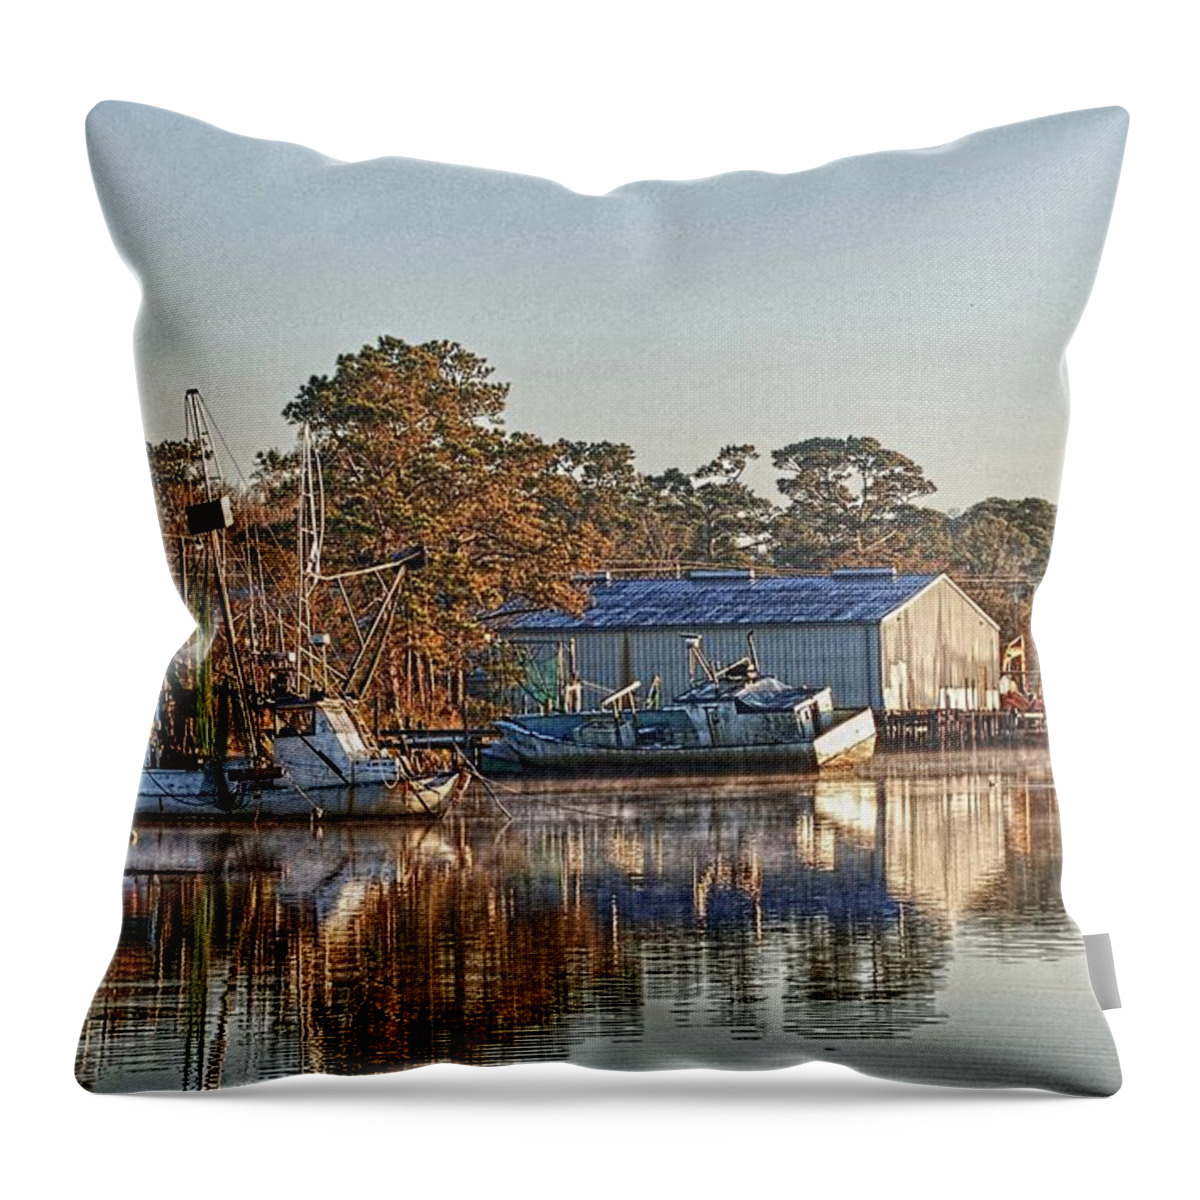 Alabama Throw Pillow featuring the digital art Boats on the Bon Secour River by Michael Thomas